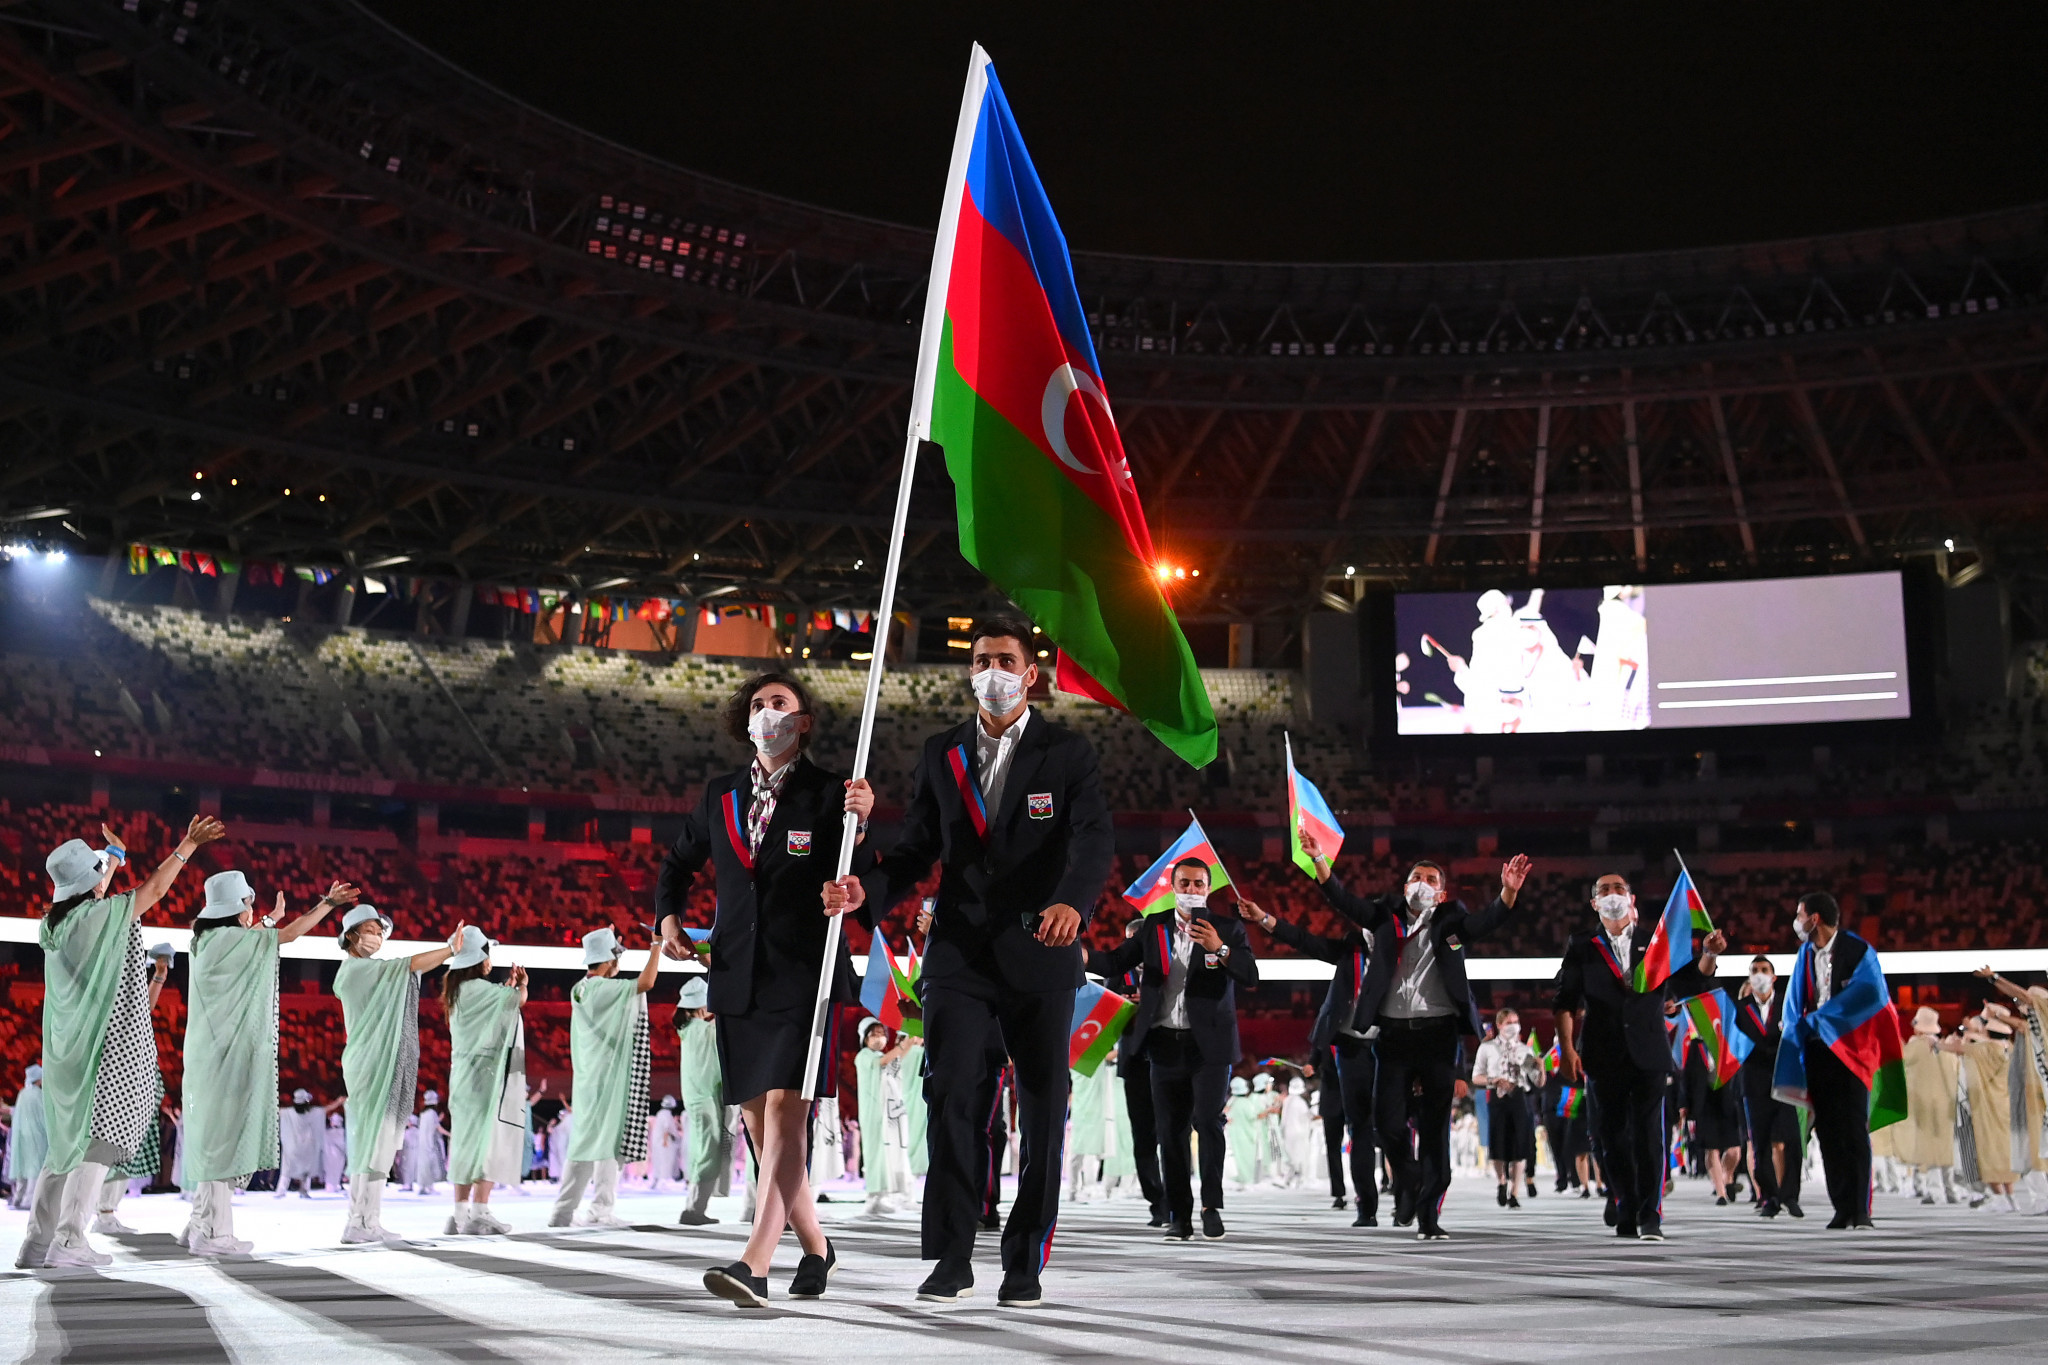 Azerbaijan is an established sporting host and its athletes are improving ©Getty Images